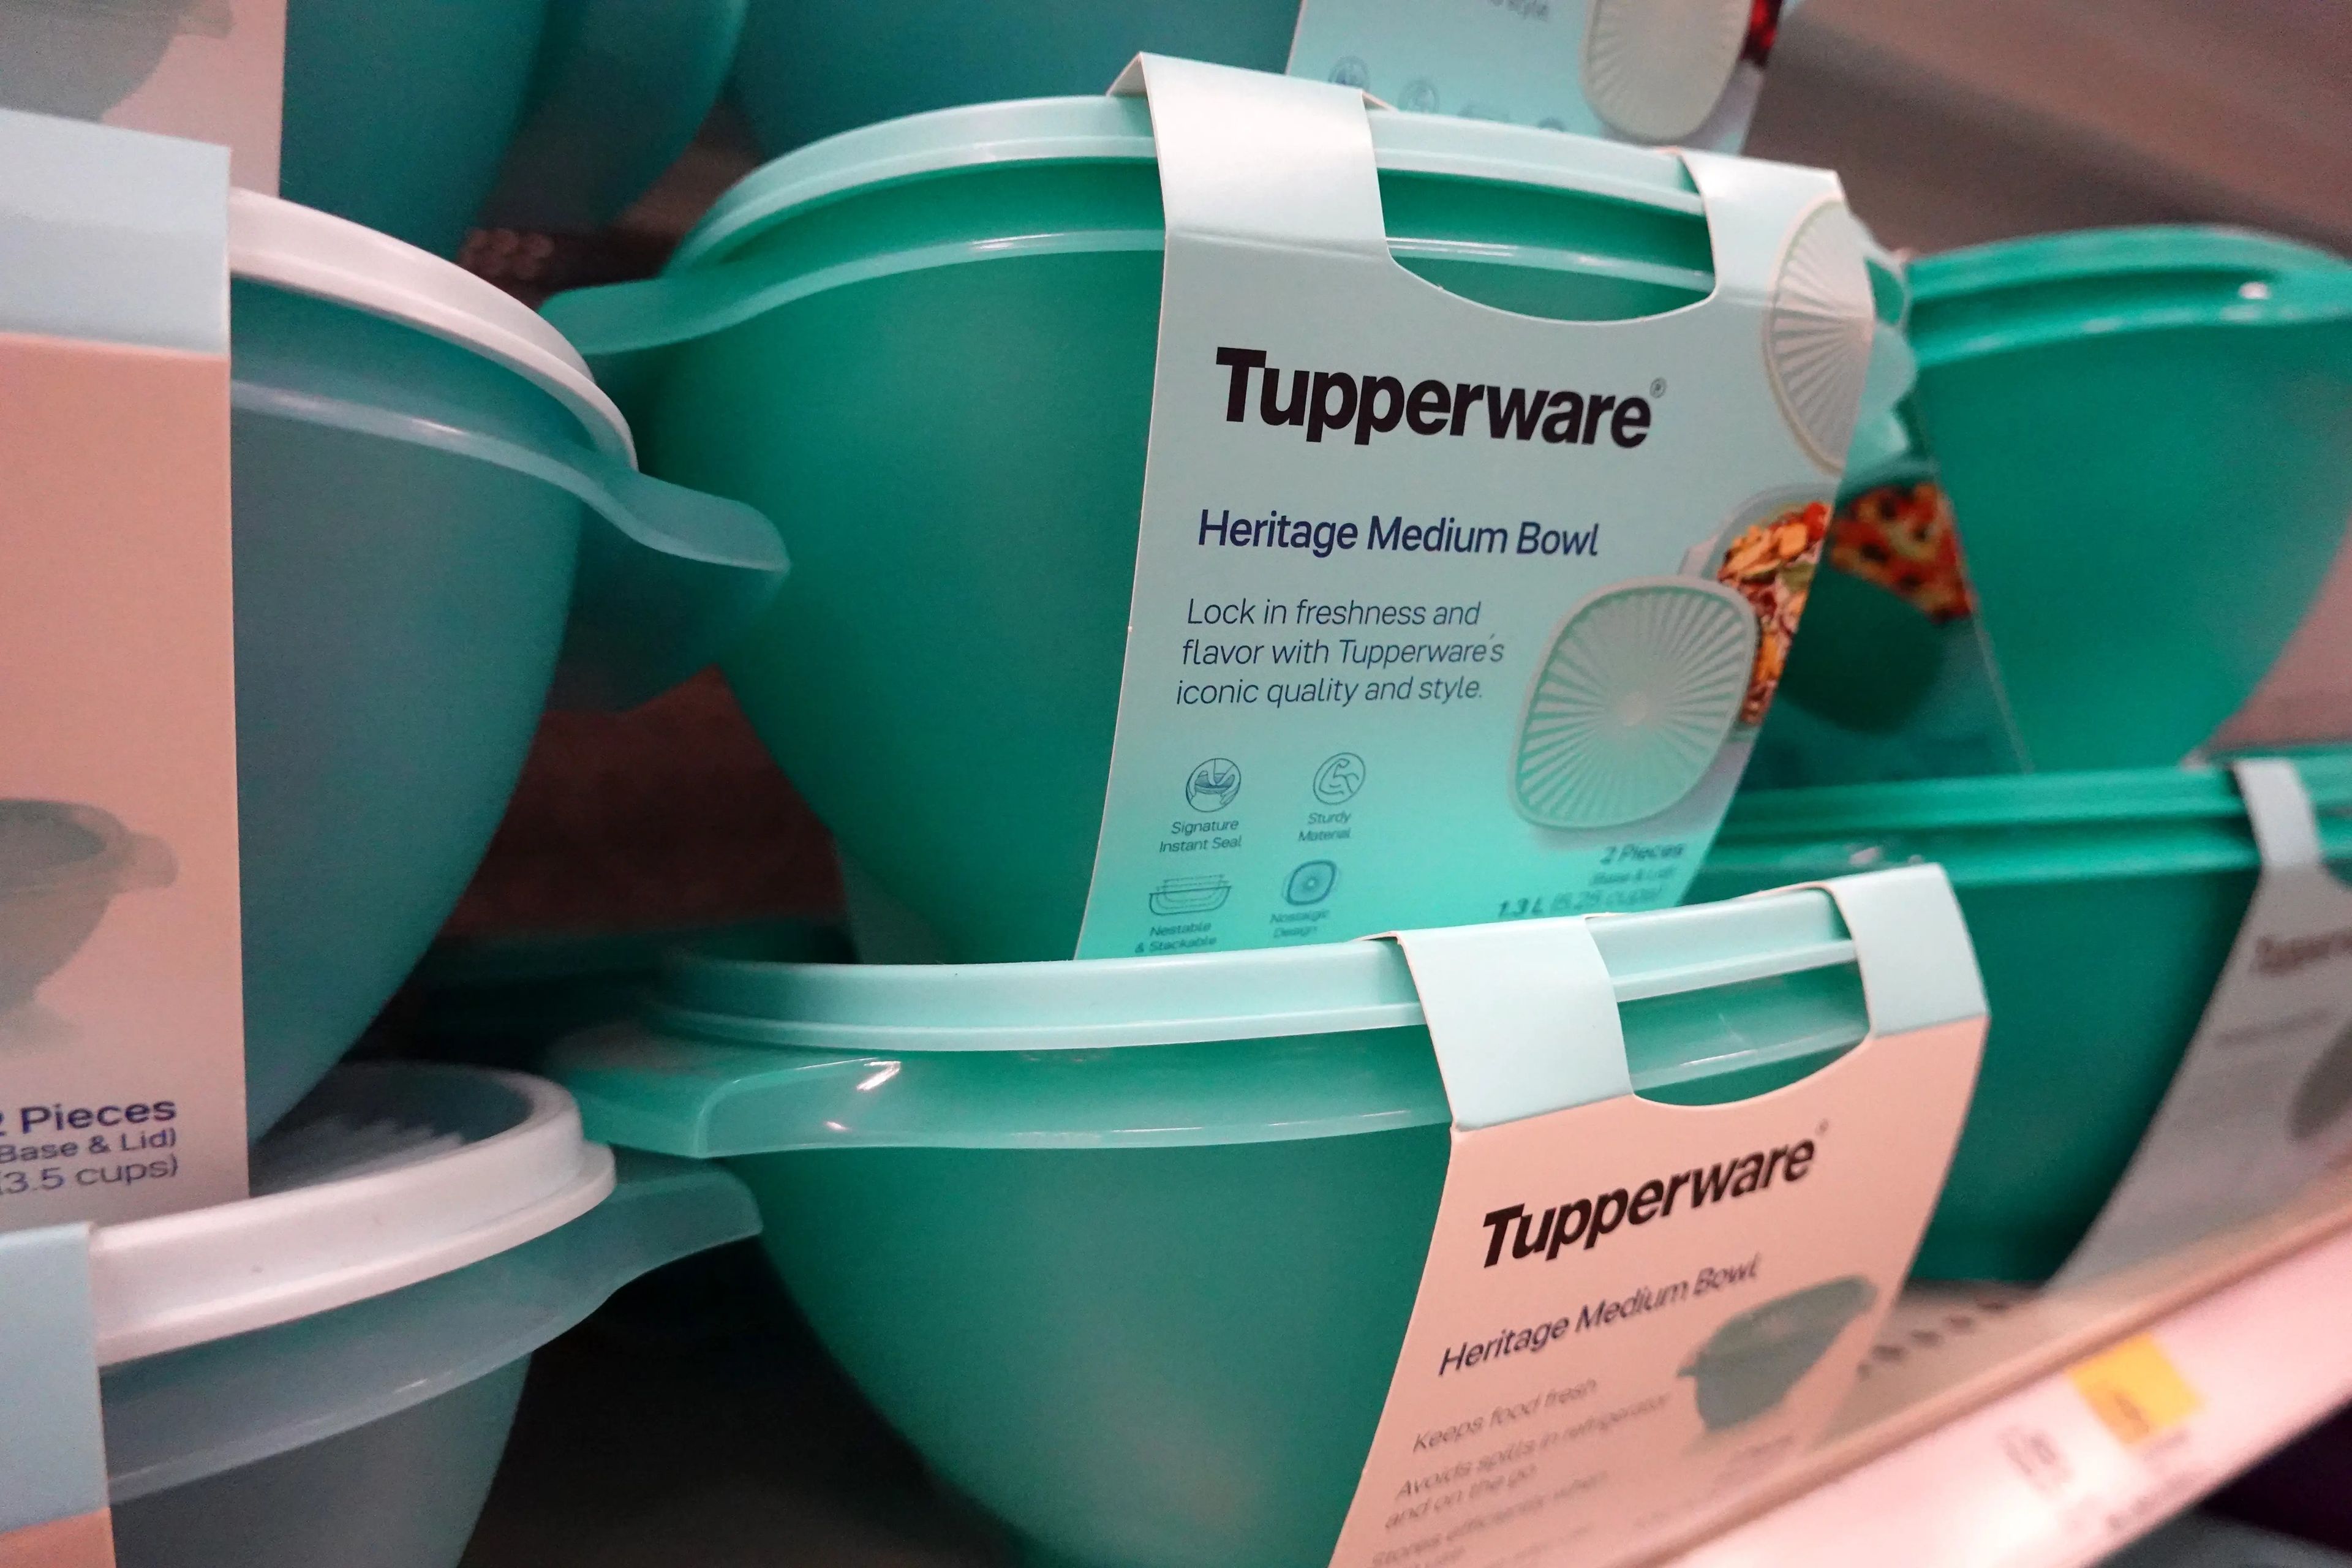 Turquoise Tupperware containers sit for sale on a shelf at a store in Chicago